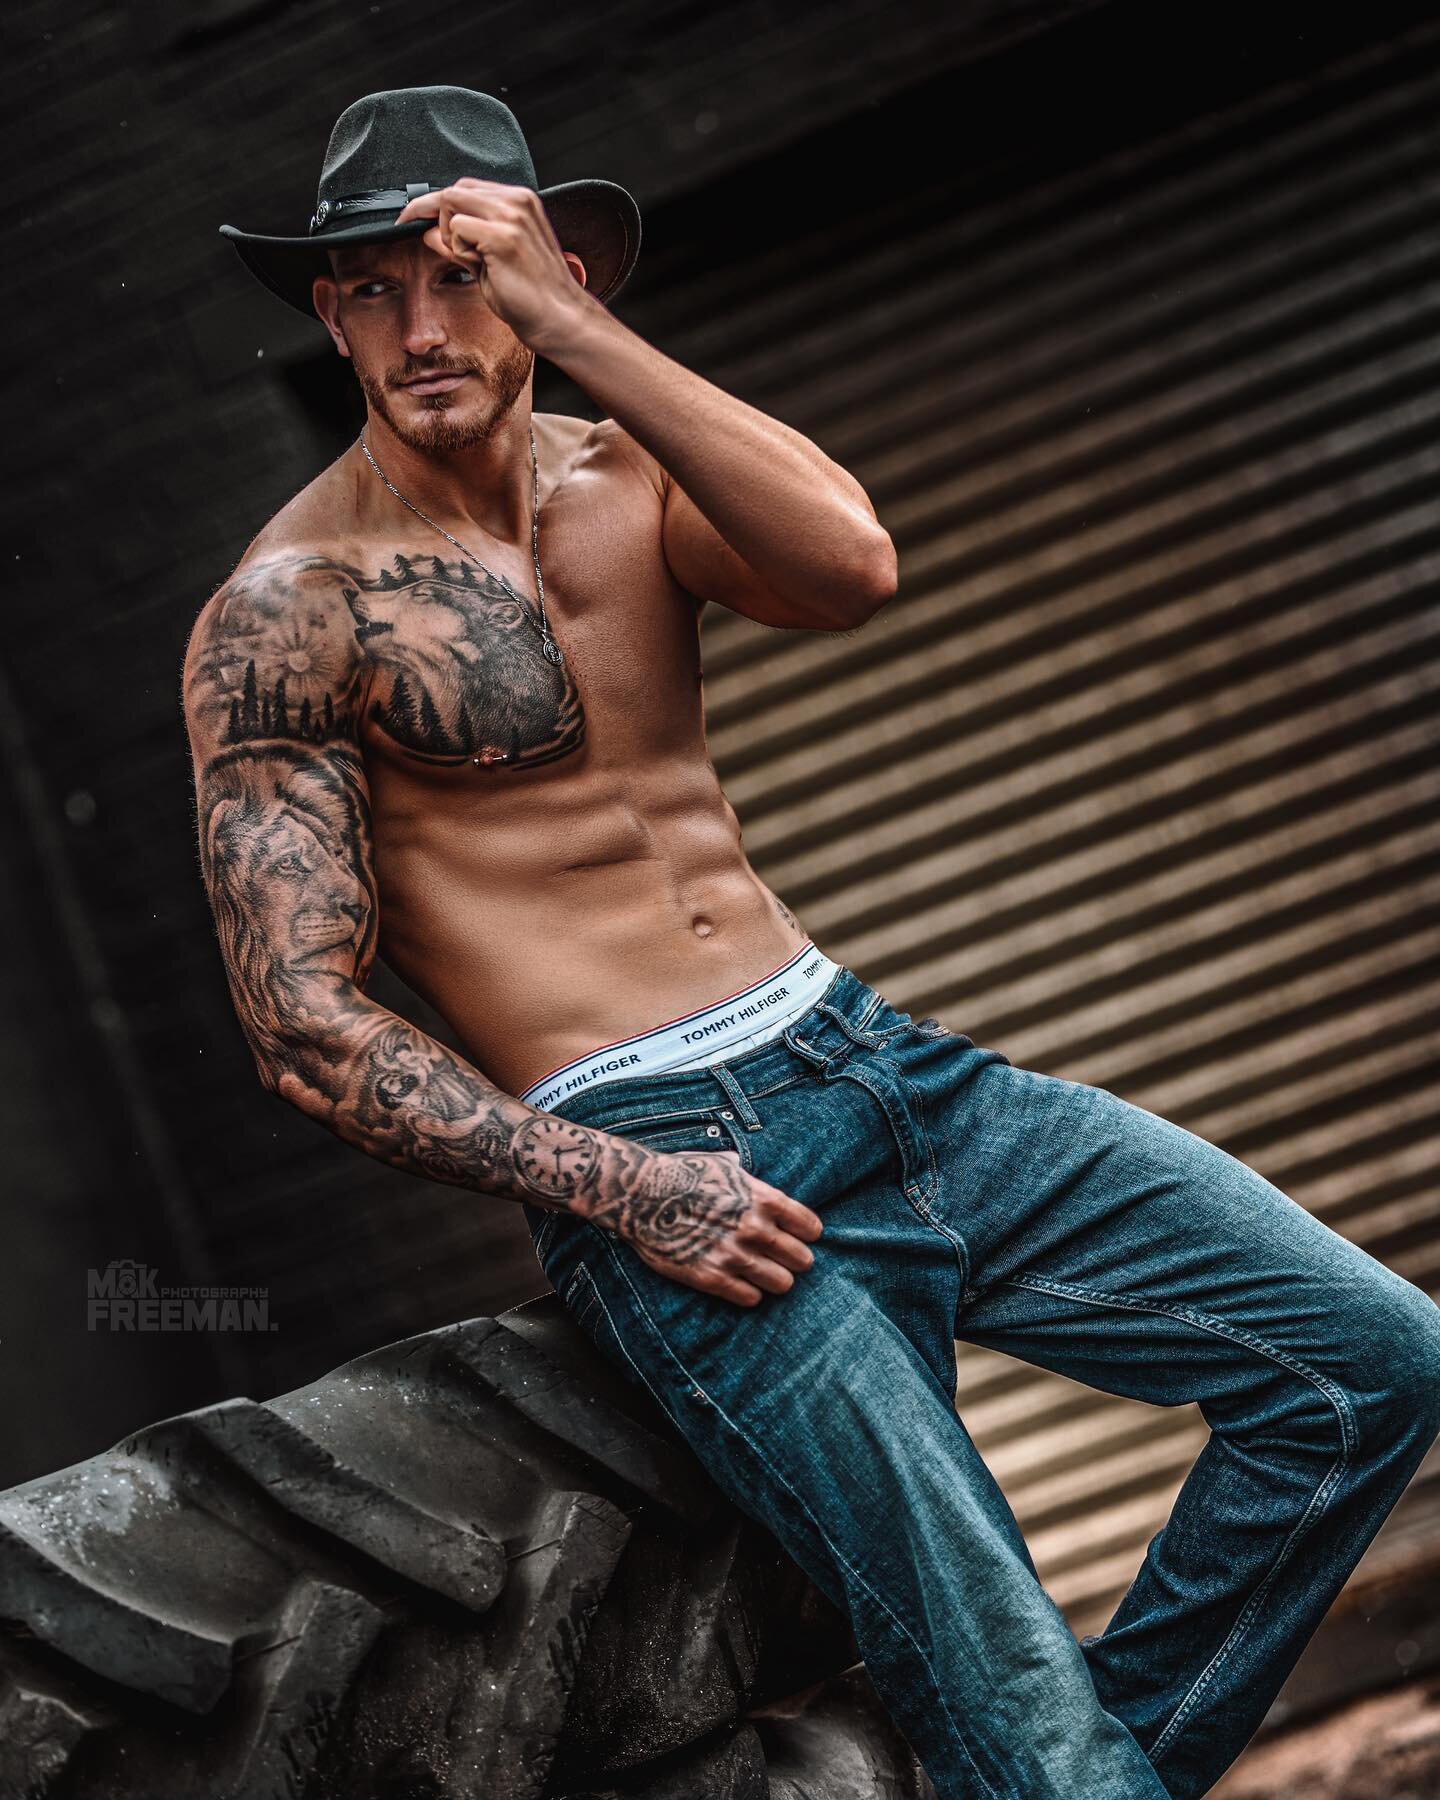 Fresh out of the camera from the recent photoshoot with @chrisbriggspt 

Stepping away from my normal gym shoots, we decided to mix things up and try something different outdoors.

Shot behind the @mofgym 

#malefitnessmodel #fitnessphotography #makf